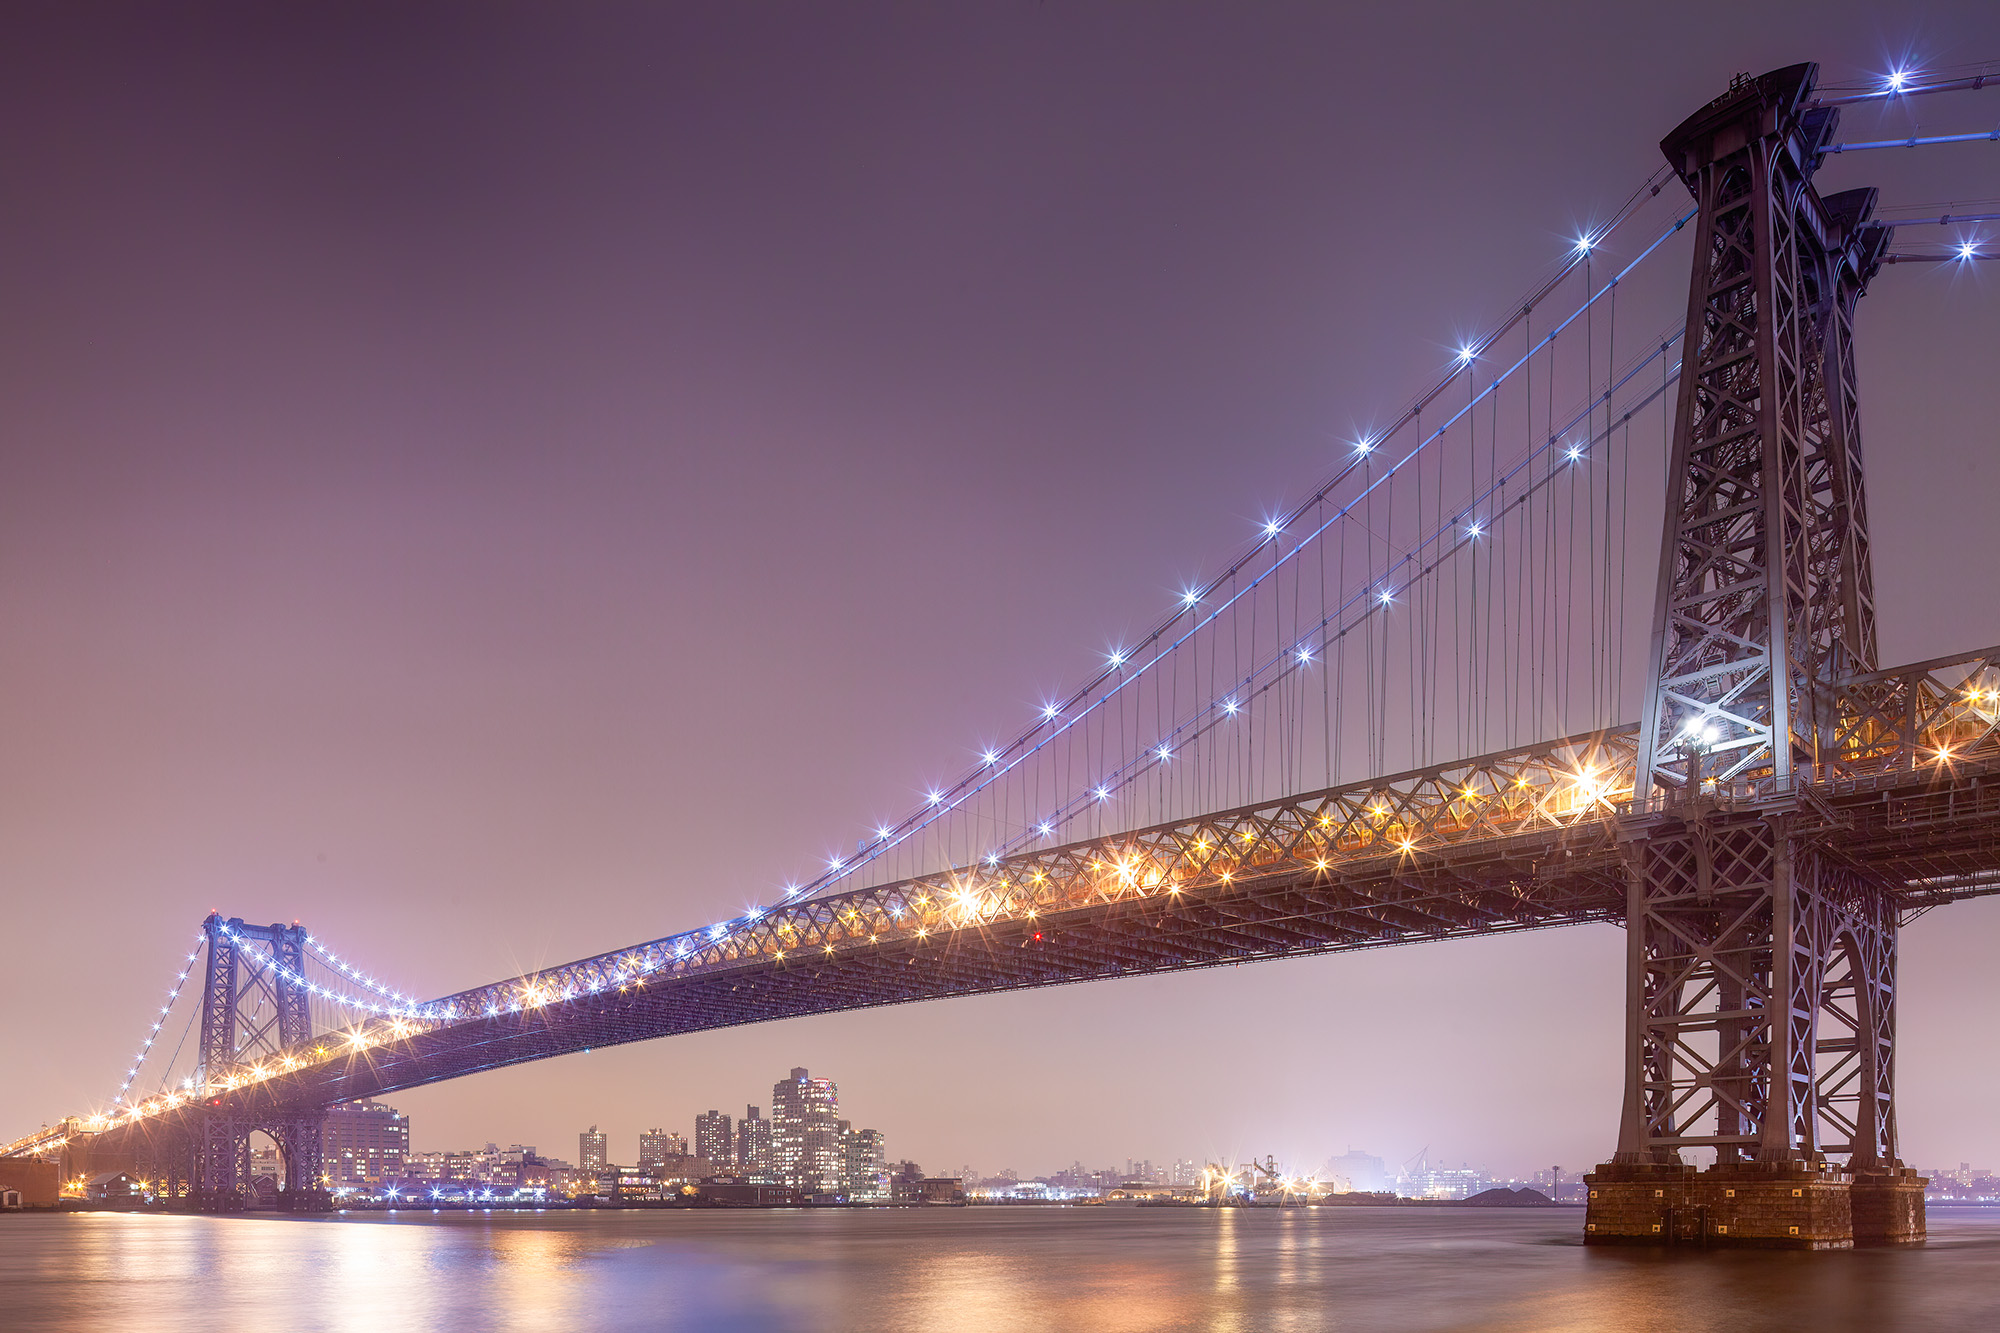 Amid the nocturnal glow of New York City, I captured the Manhattan Bridge in all its luminous splendor. Its majestic presence...